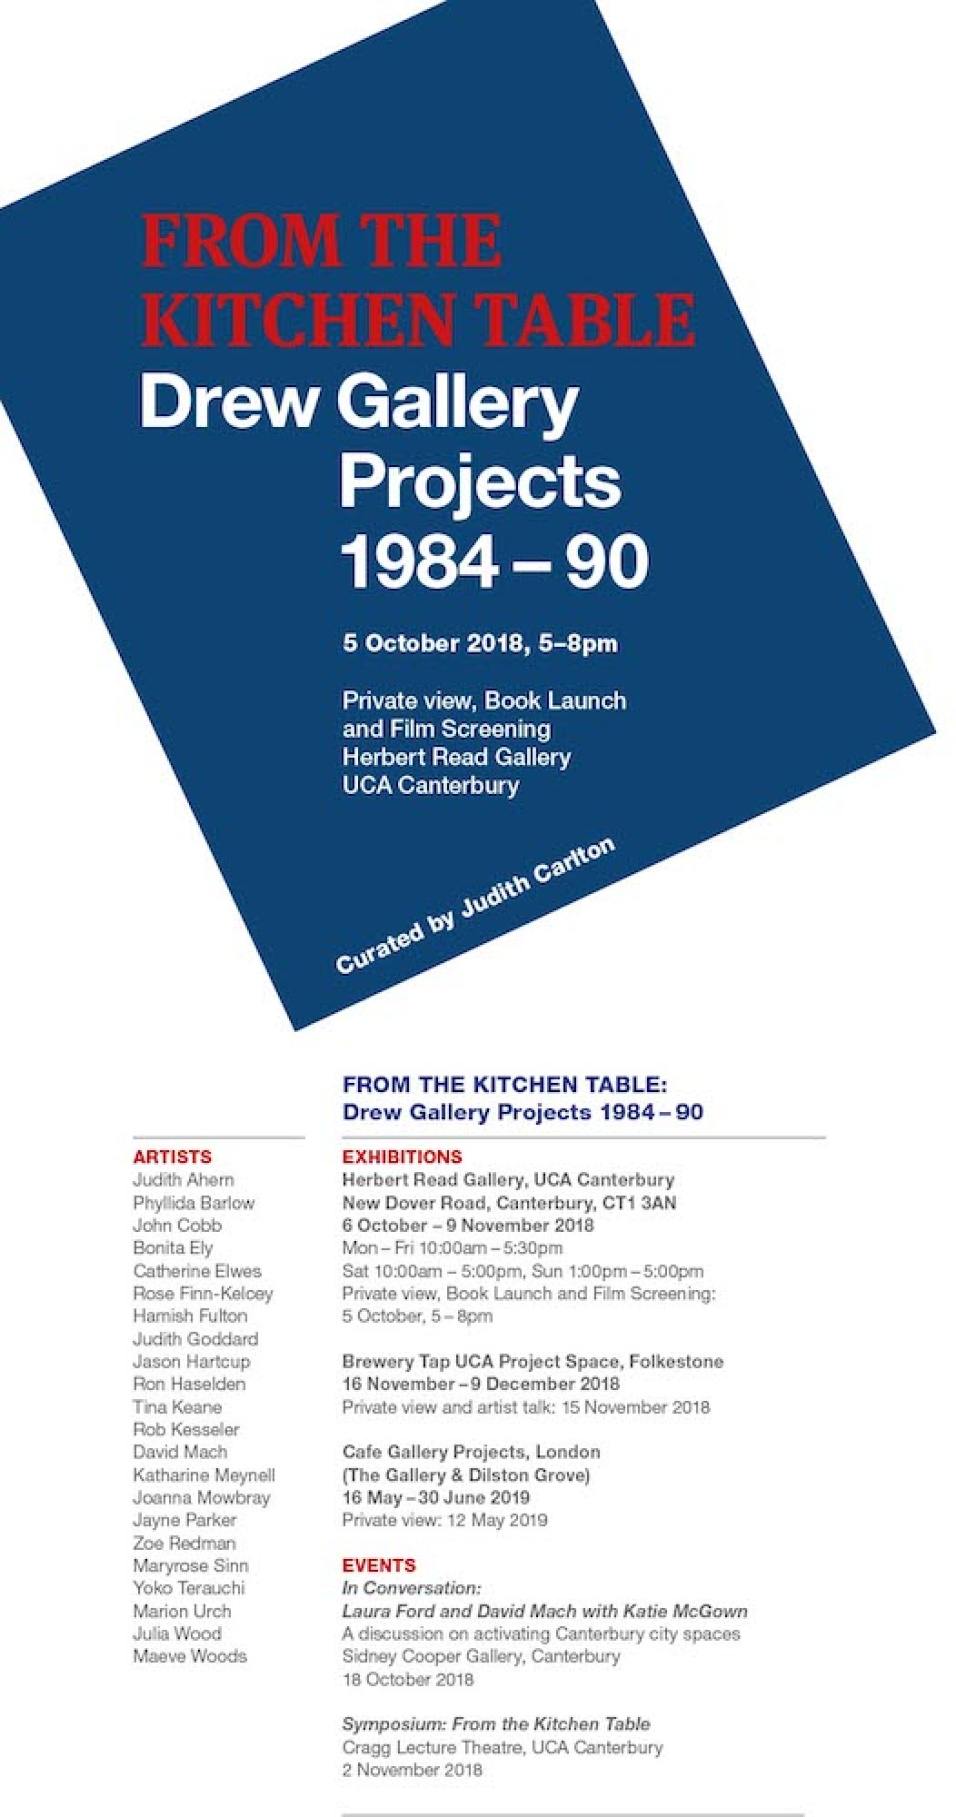 From the Kitchen Table, Drew Gallery Projects 1984 -90 poster